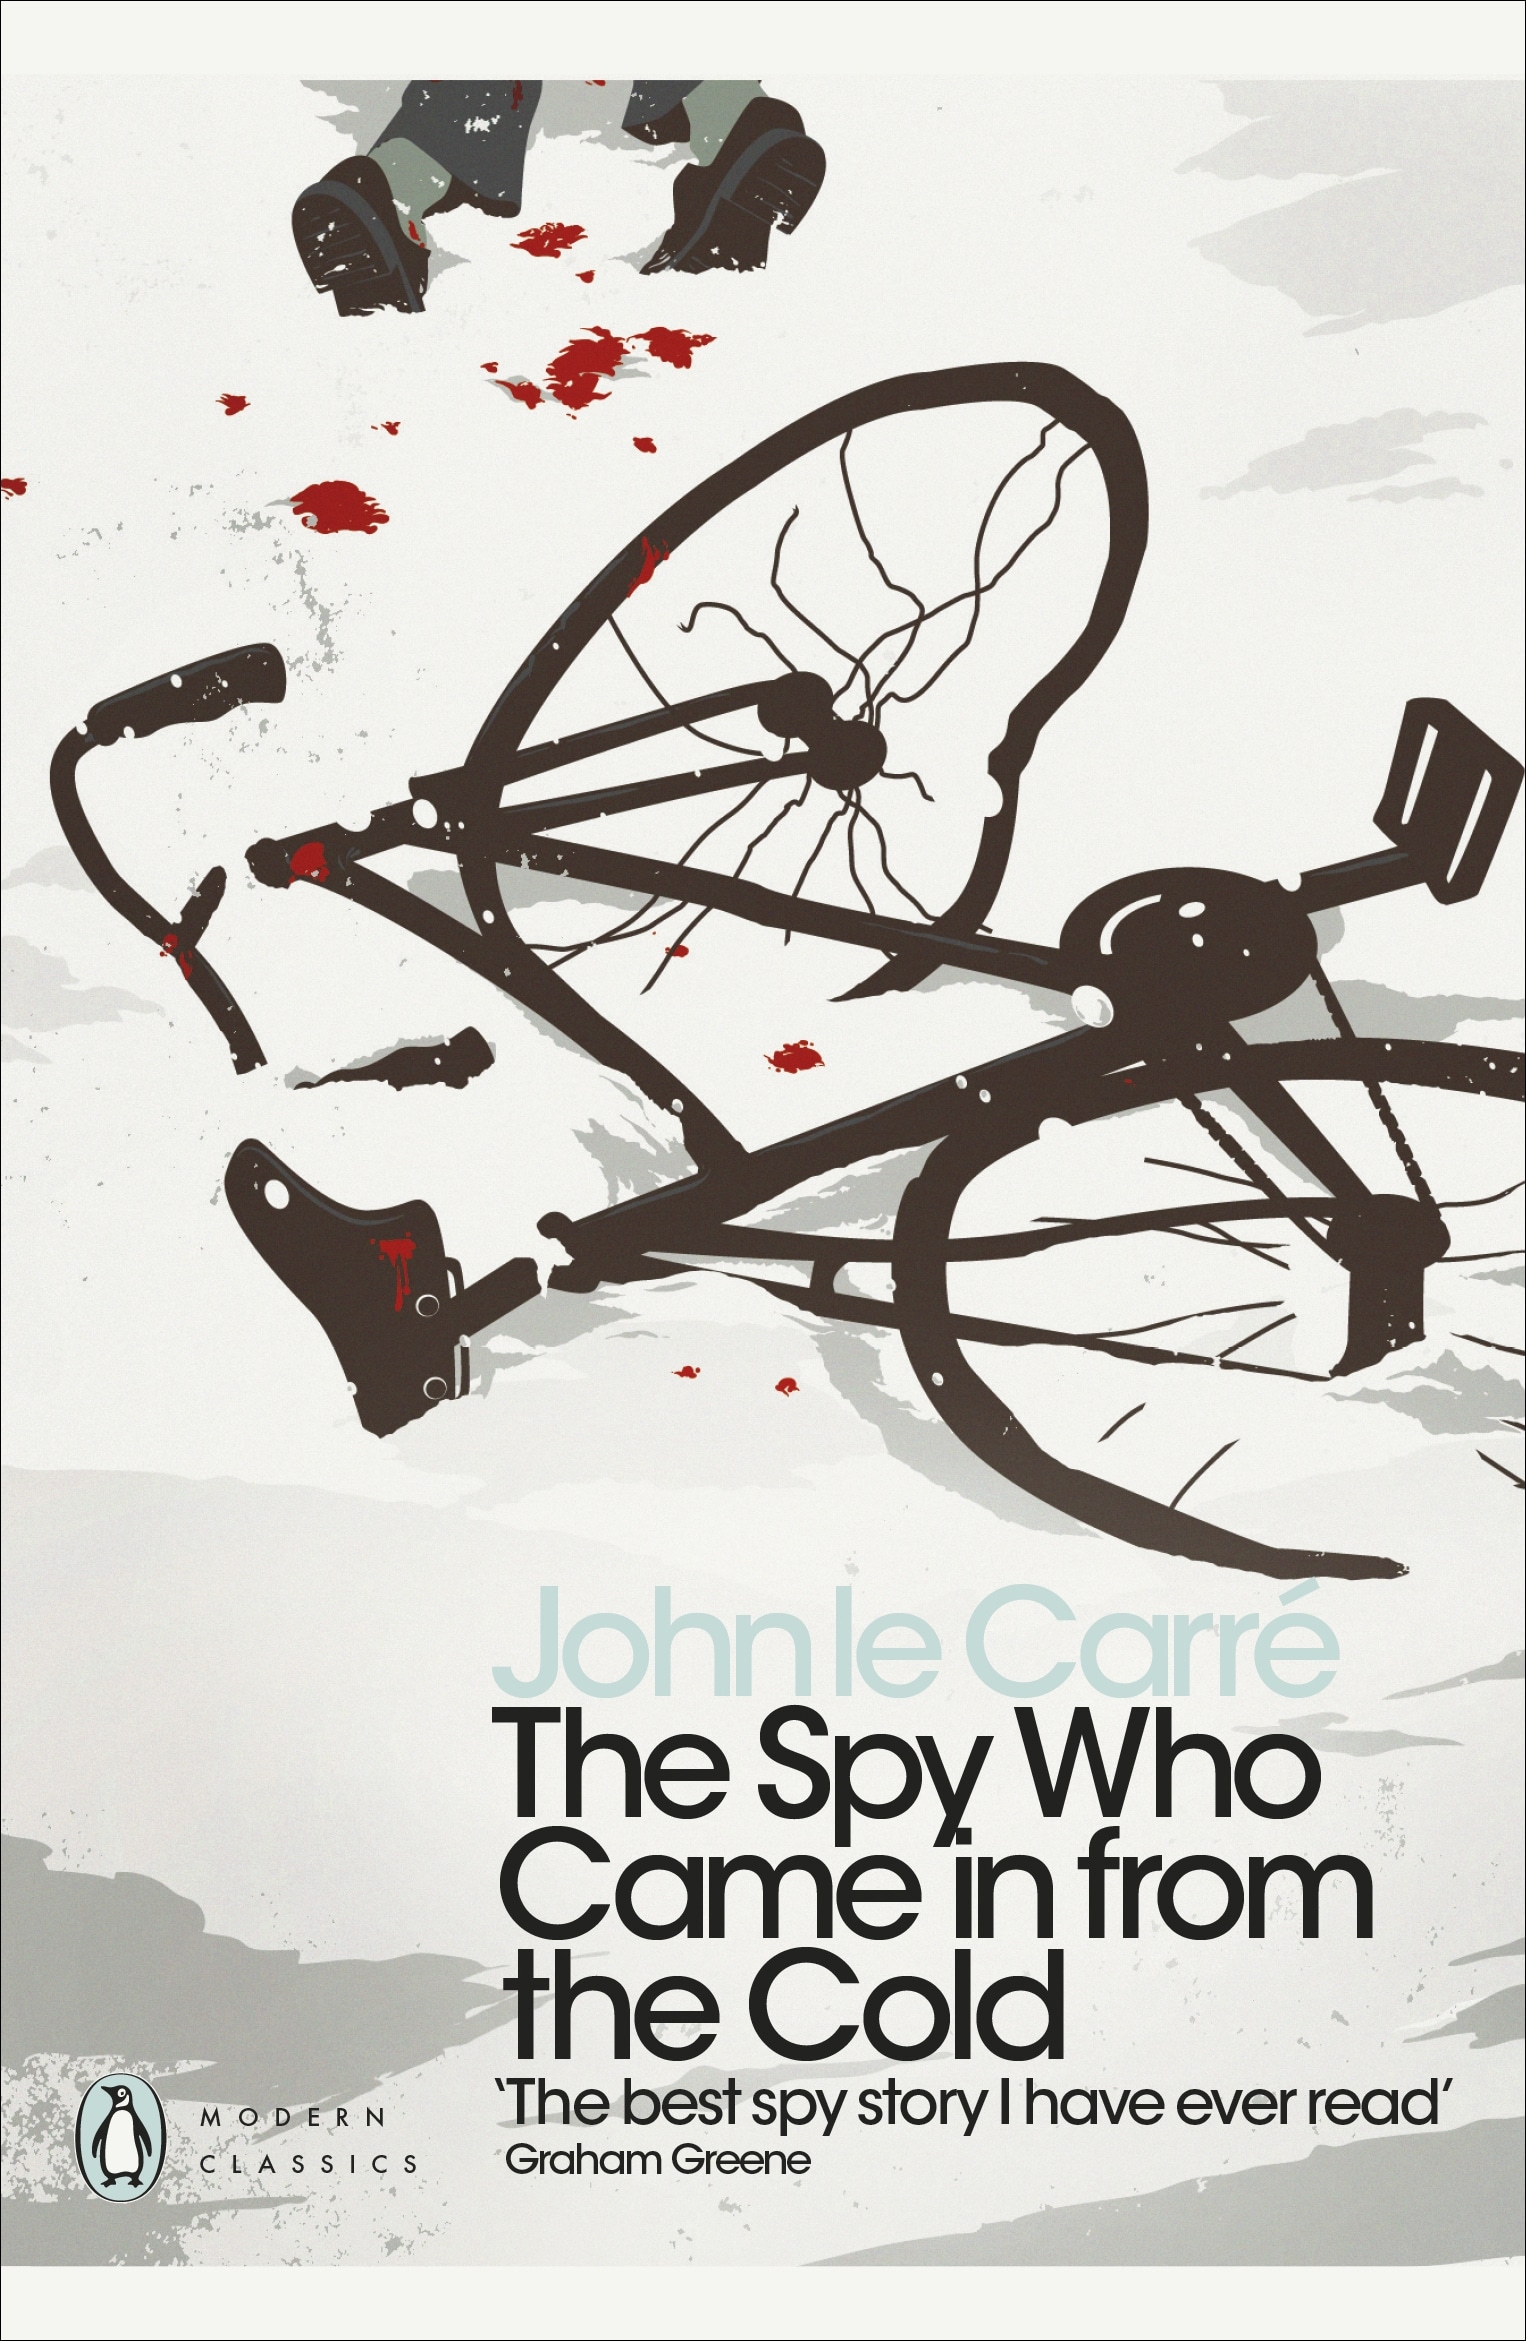 Book “The Spy Who Came in from the Cold” by John le Carré, William Boyd — July 29, 2010